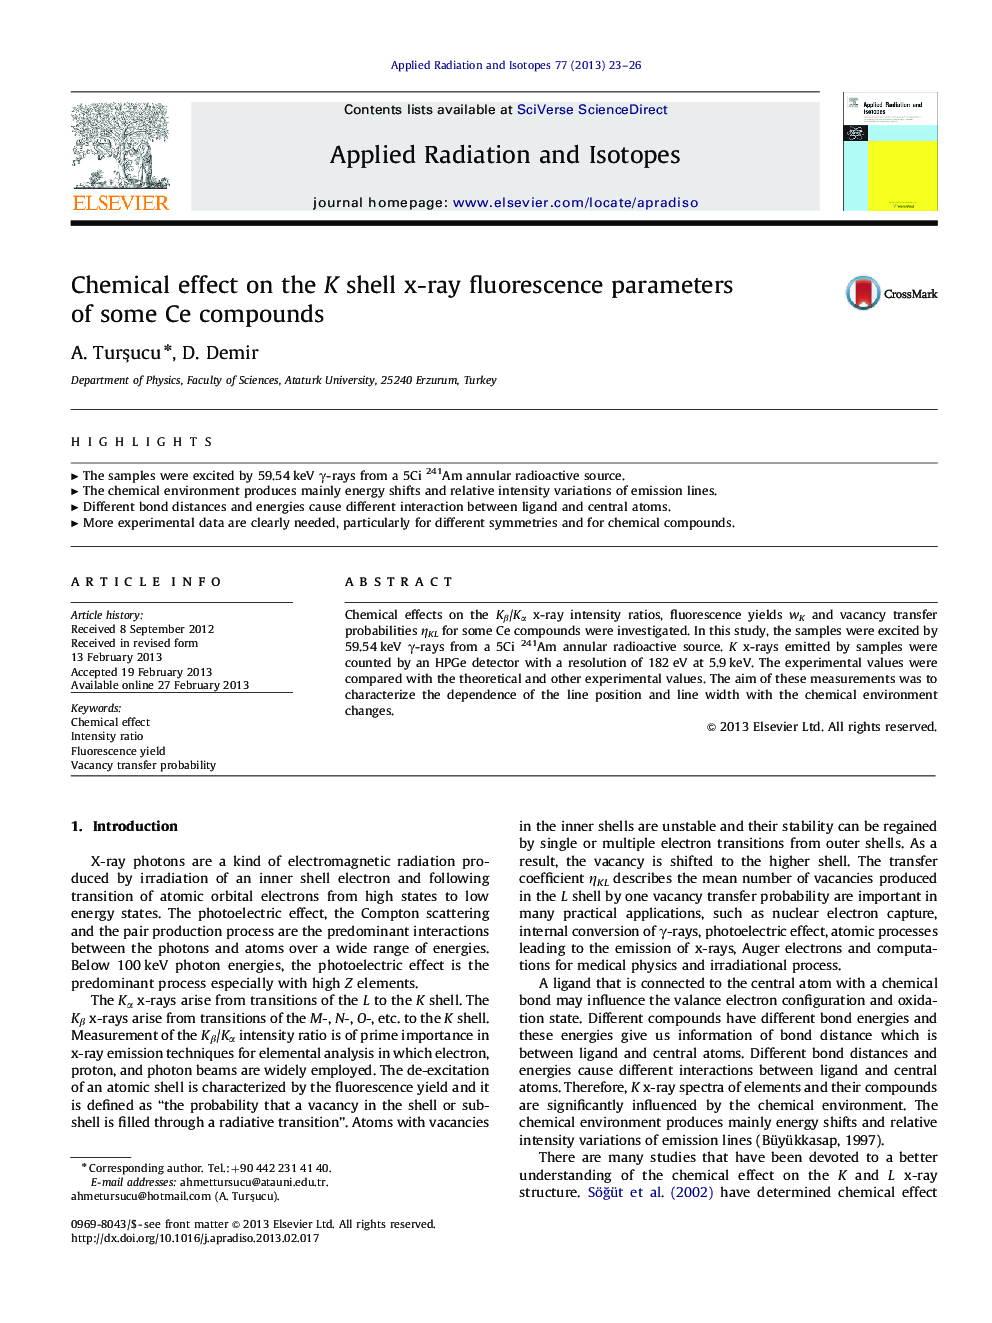 Chemical effect on the K shell x-ray fluorescence parameters of some Ce compounds